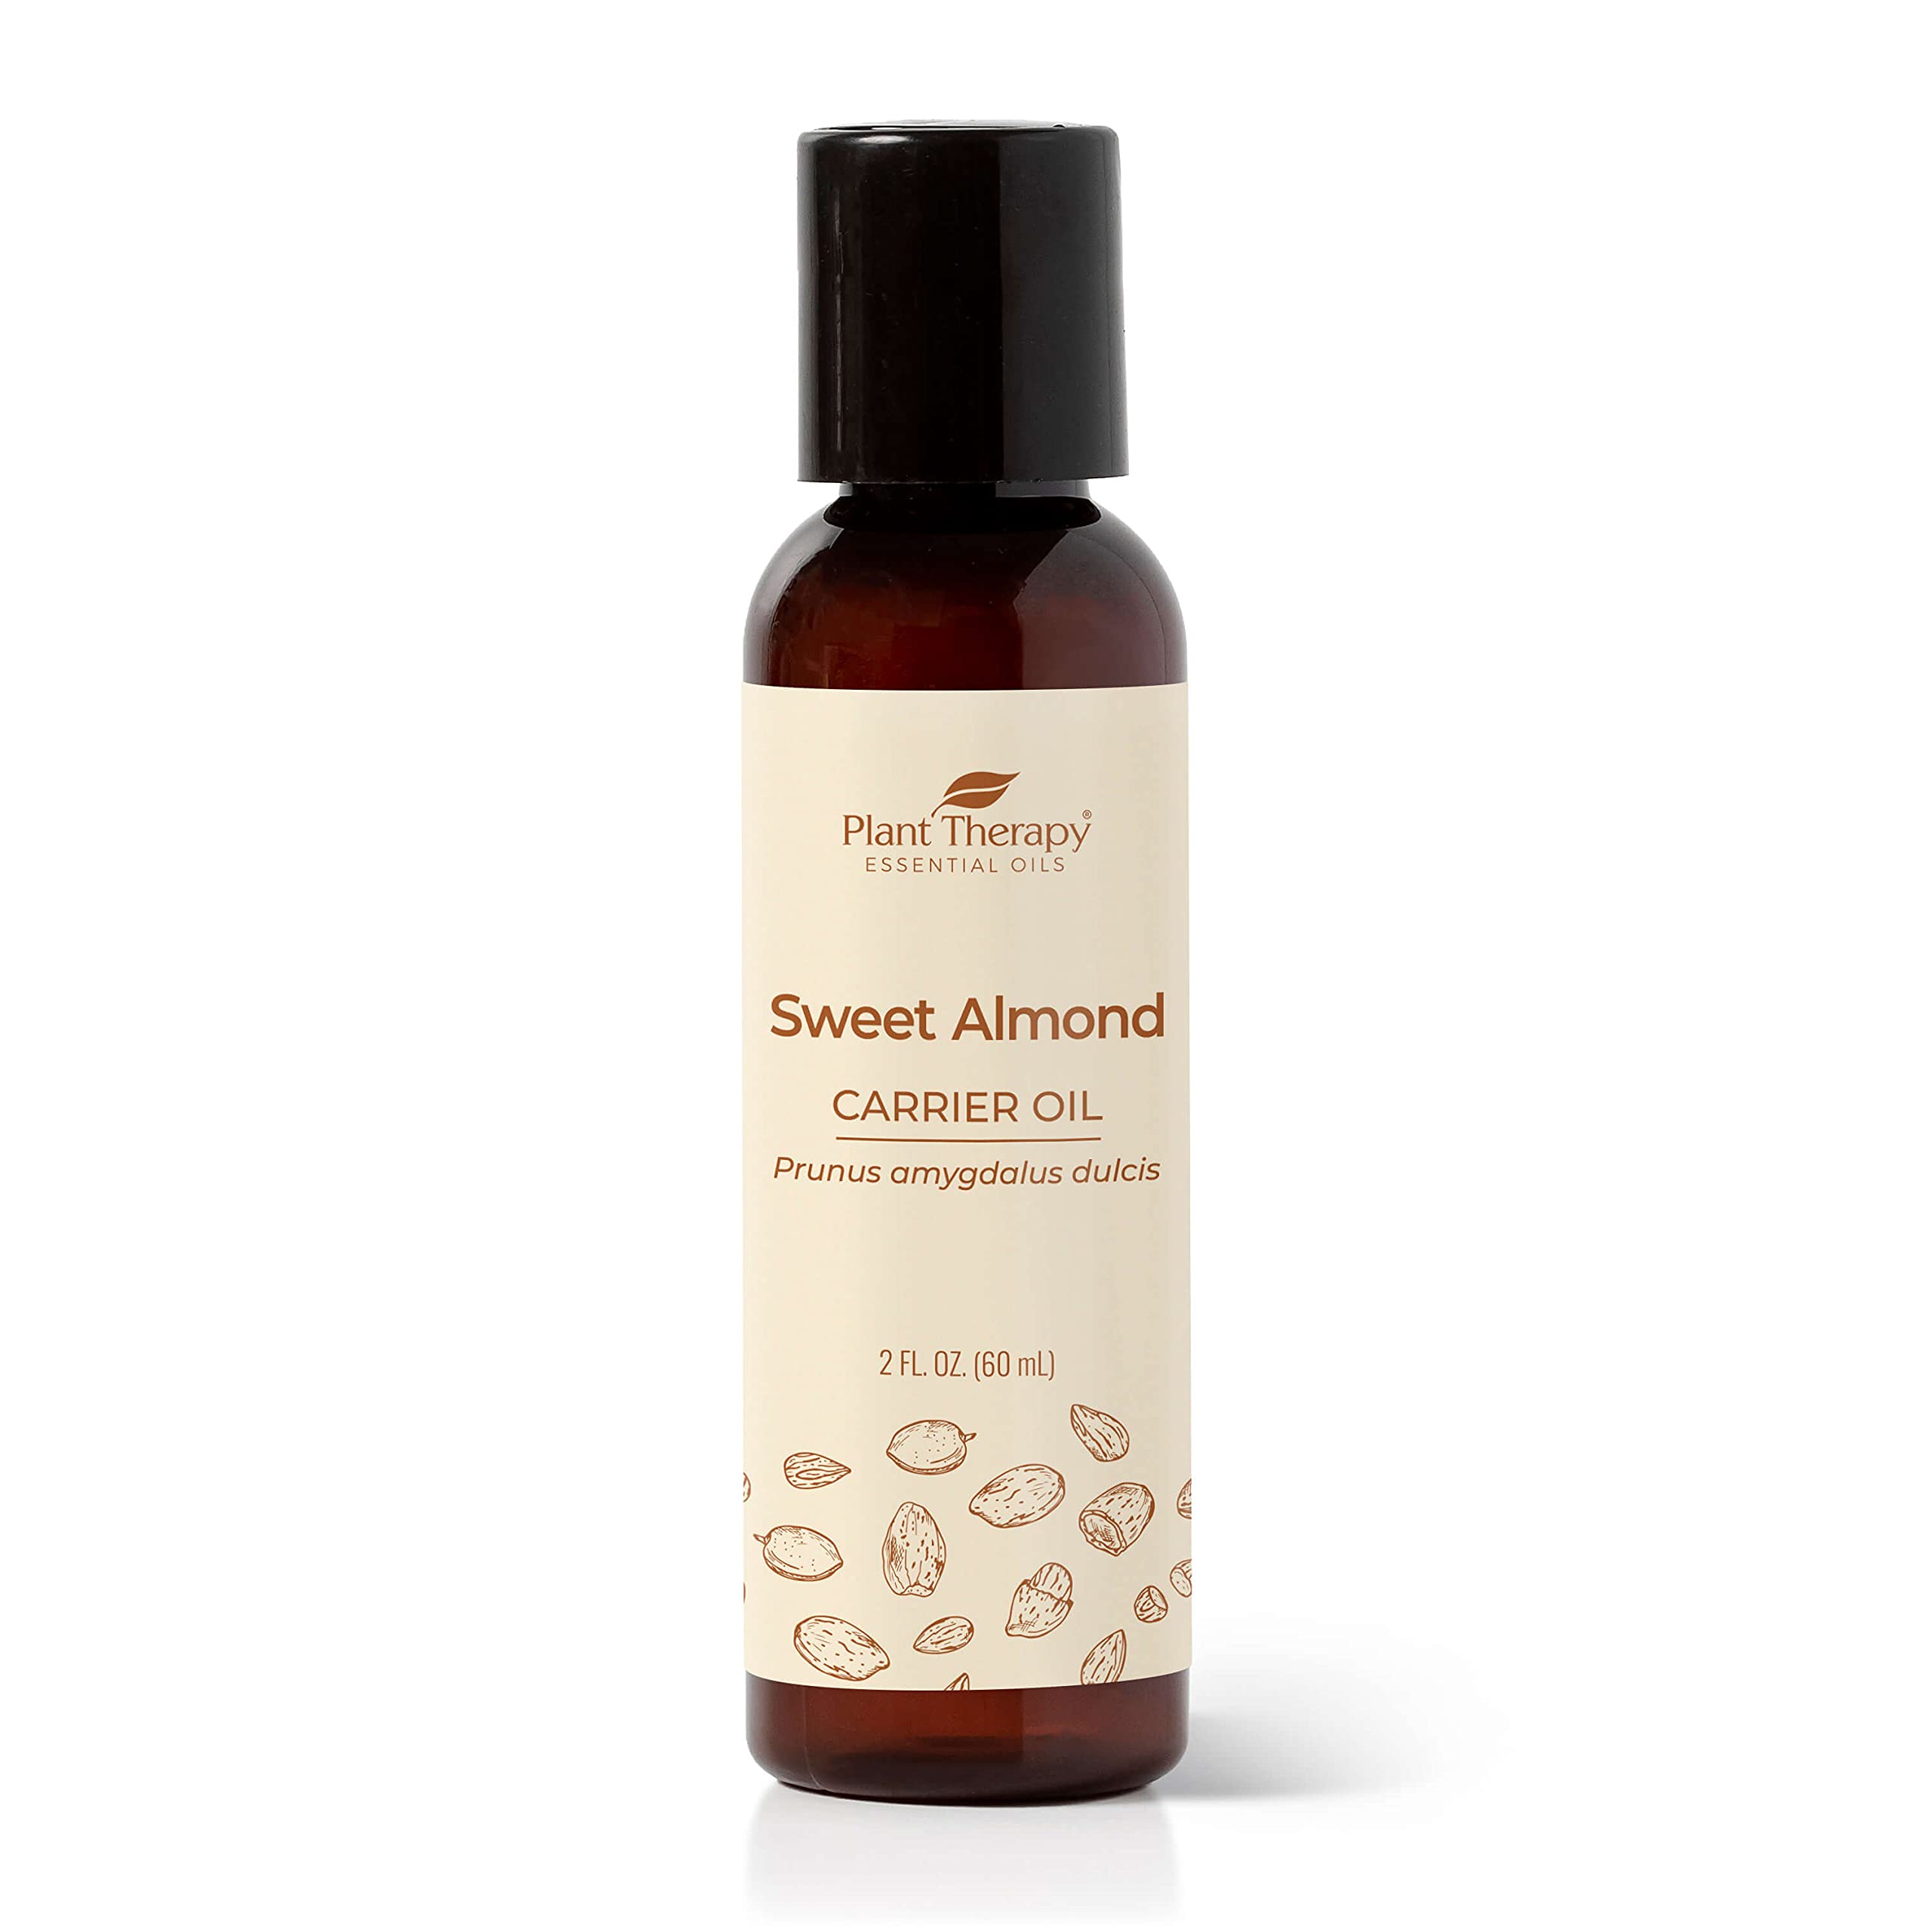 Plant Therapy Sweet Almond Oil - Almond Oil for Hair, Skin, Face, Body & Baby - Aromatherapy Carrier Oil, Natural Moisturizer & Massage 100% Pure, Cold Pressed California Almonds, Made in USA, 2 oz